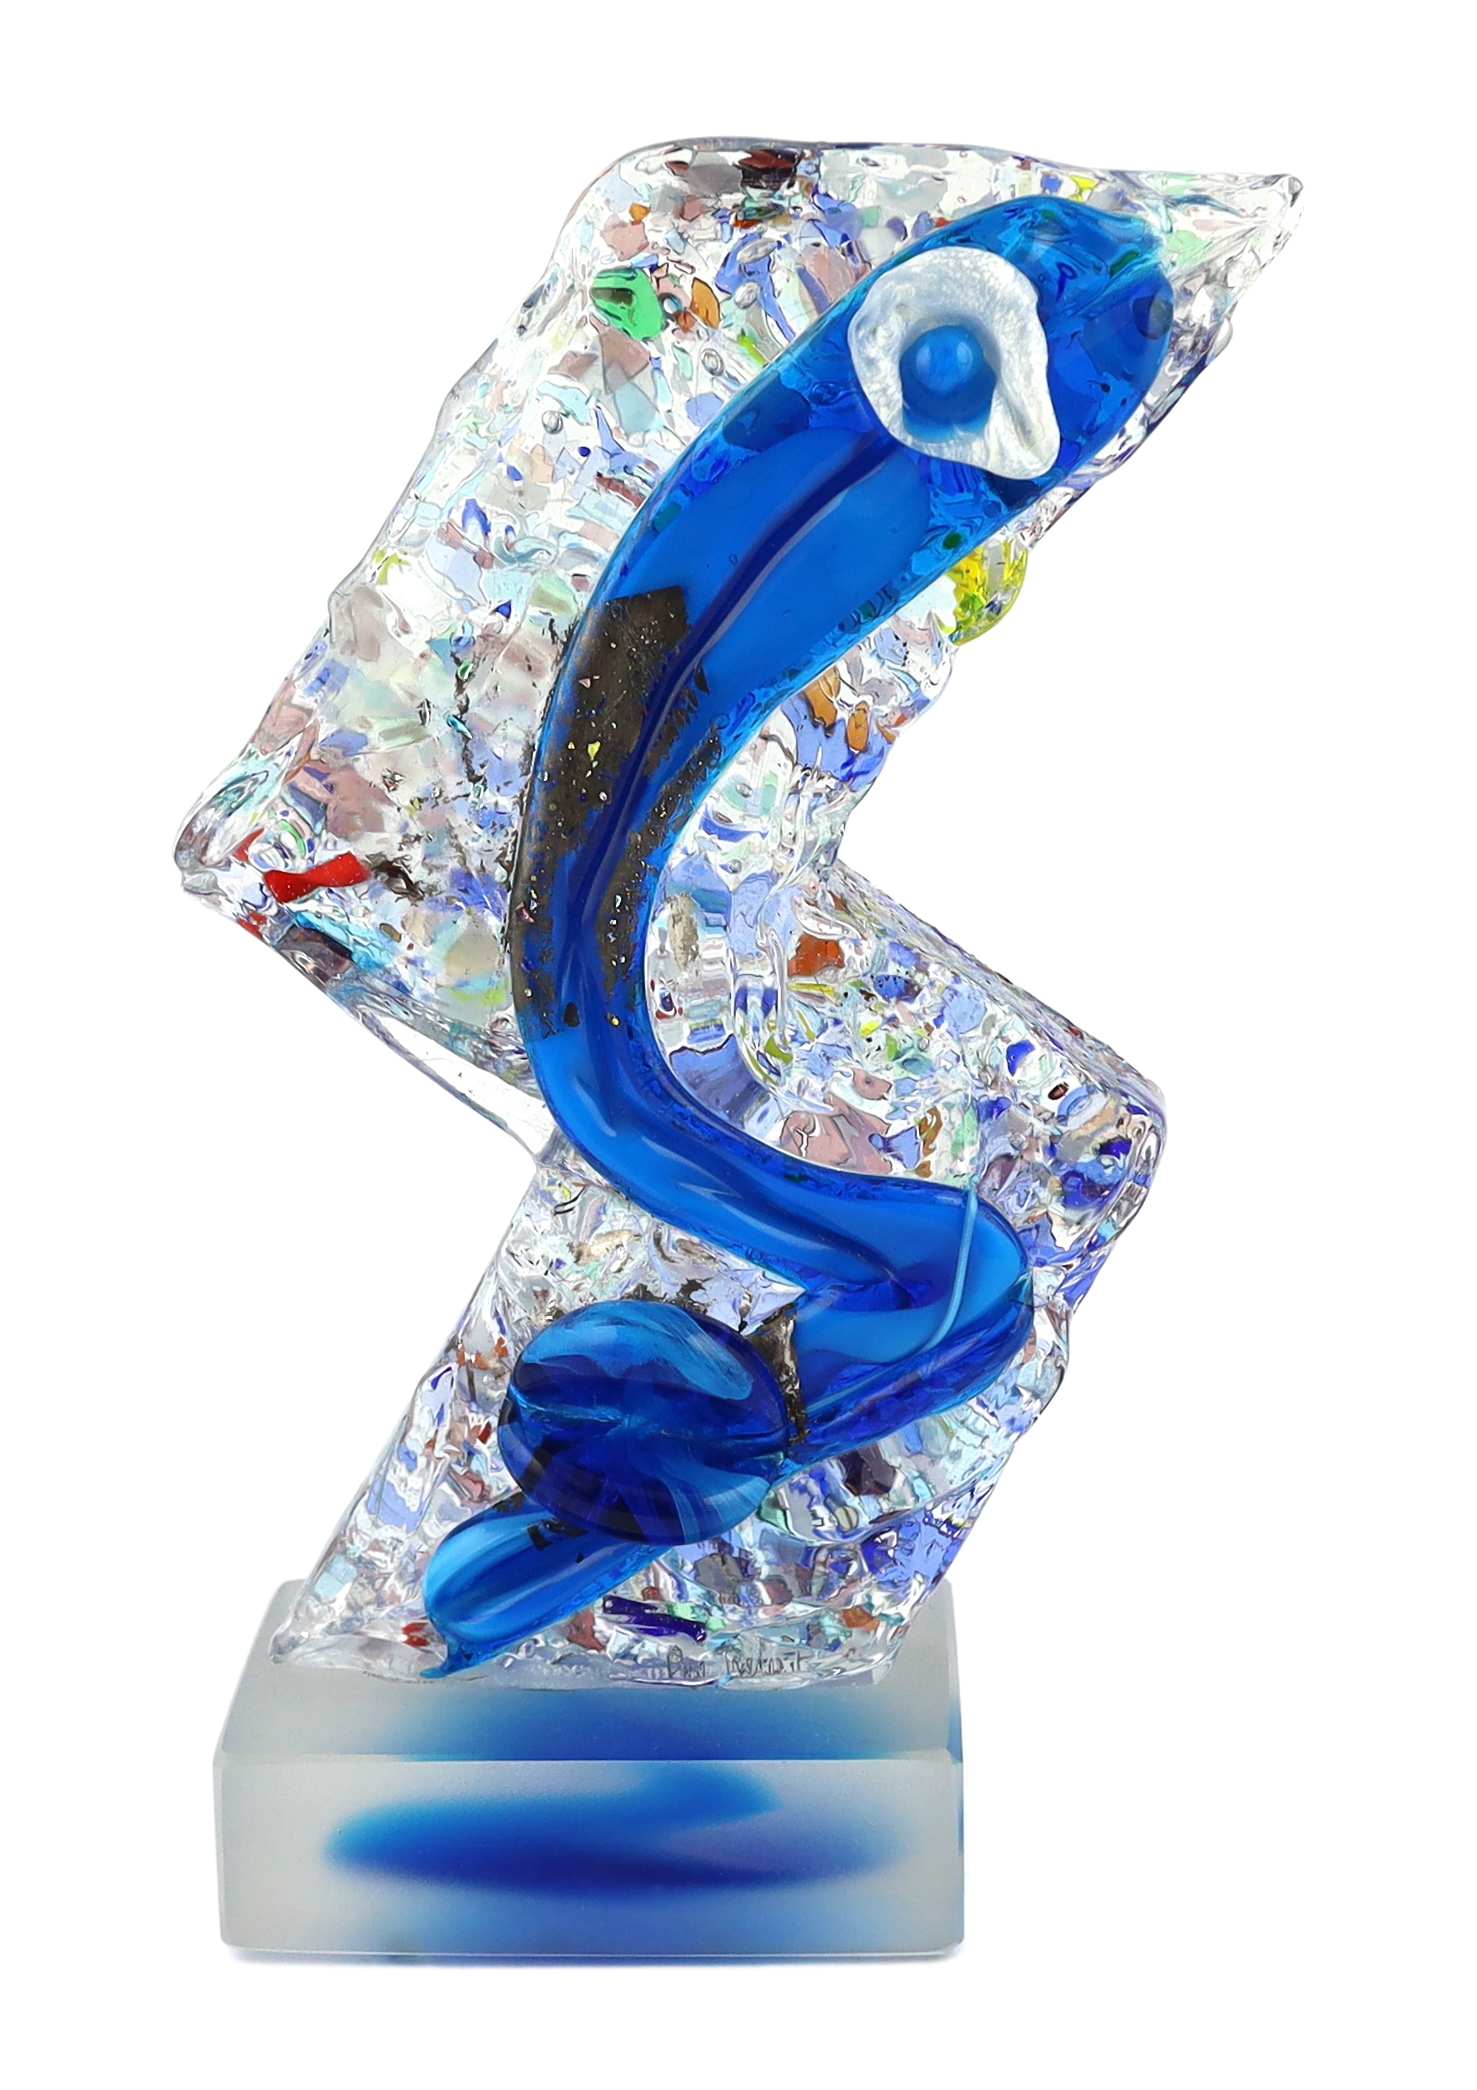 A Murano glass abstract model of a leaping fish                                                                                                                                                                             